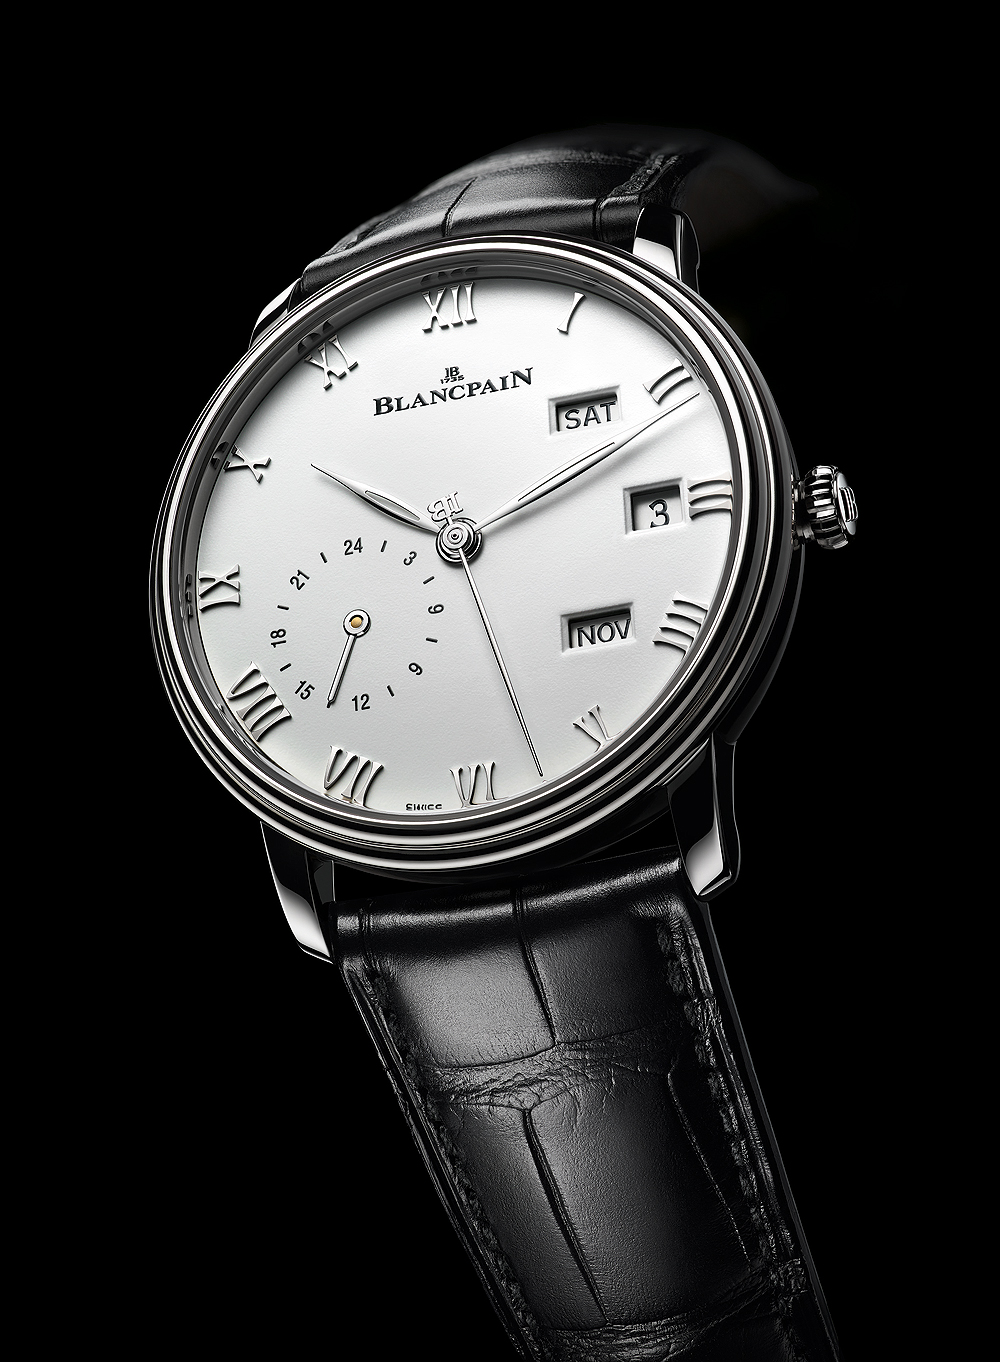 Showing at WatchTime New York 2016: Blancpain Villeret Annual Calendar ...